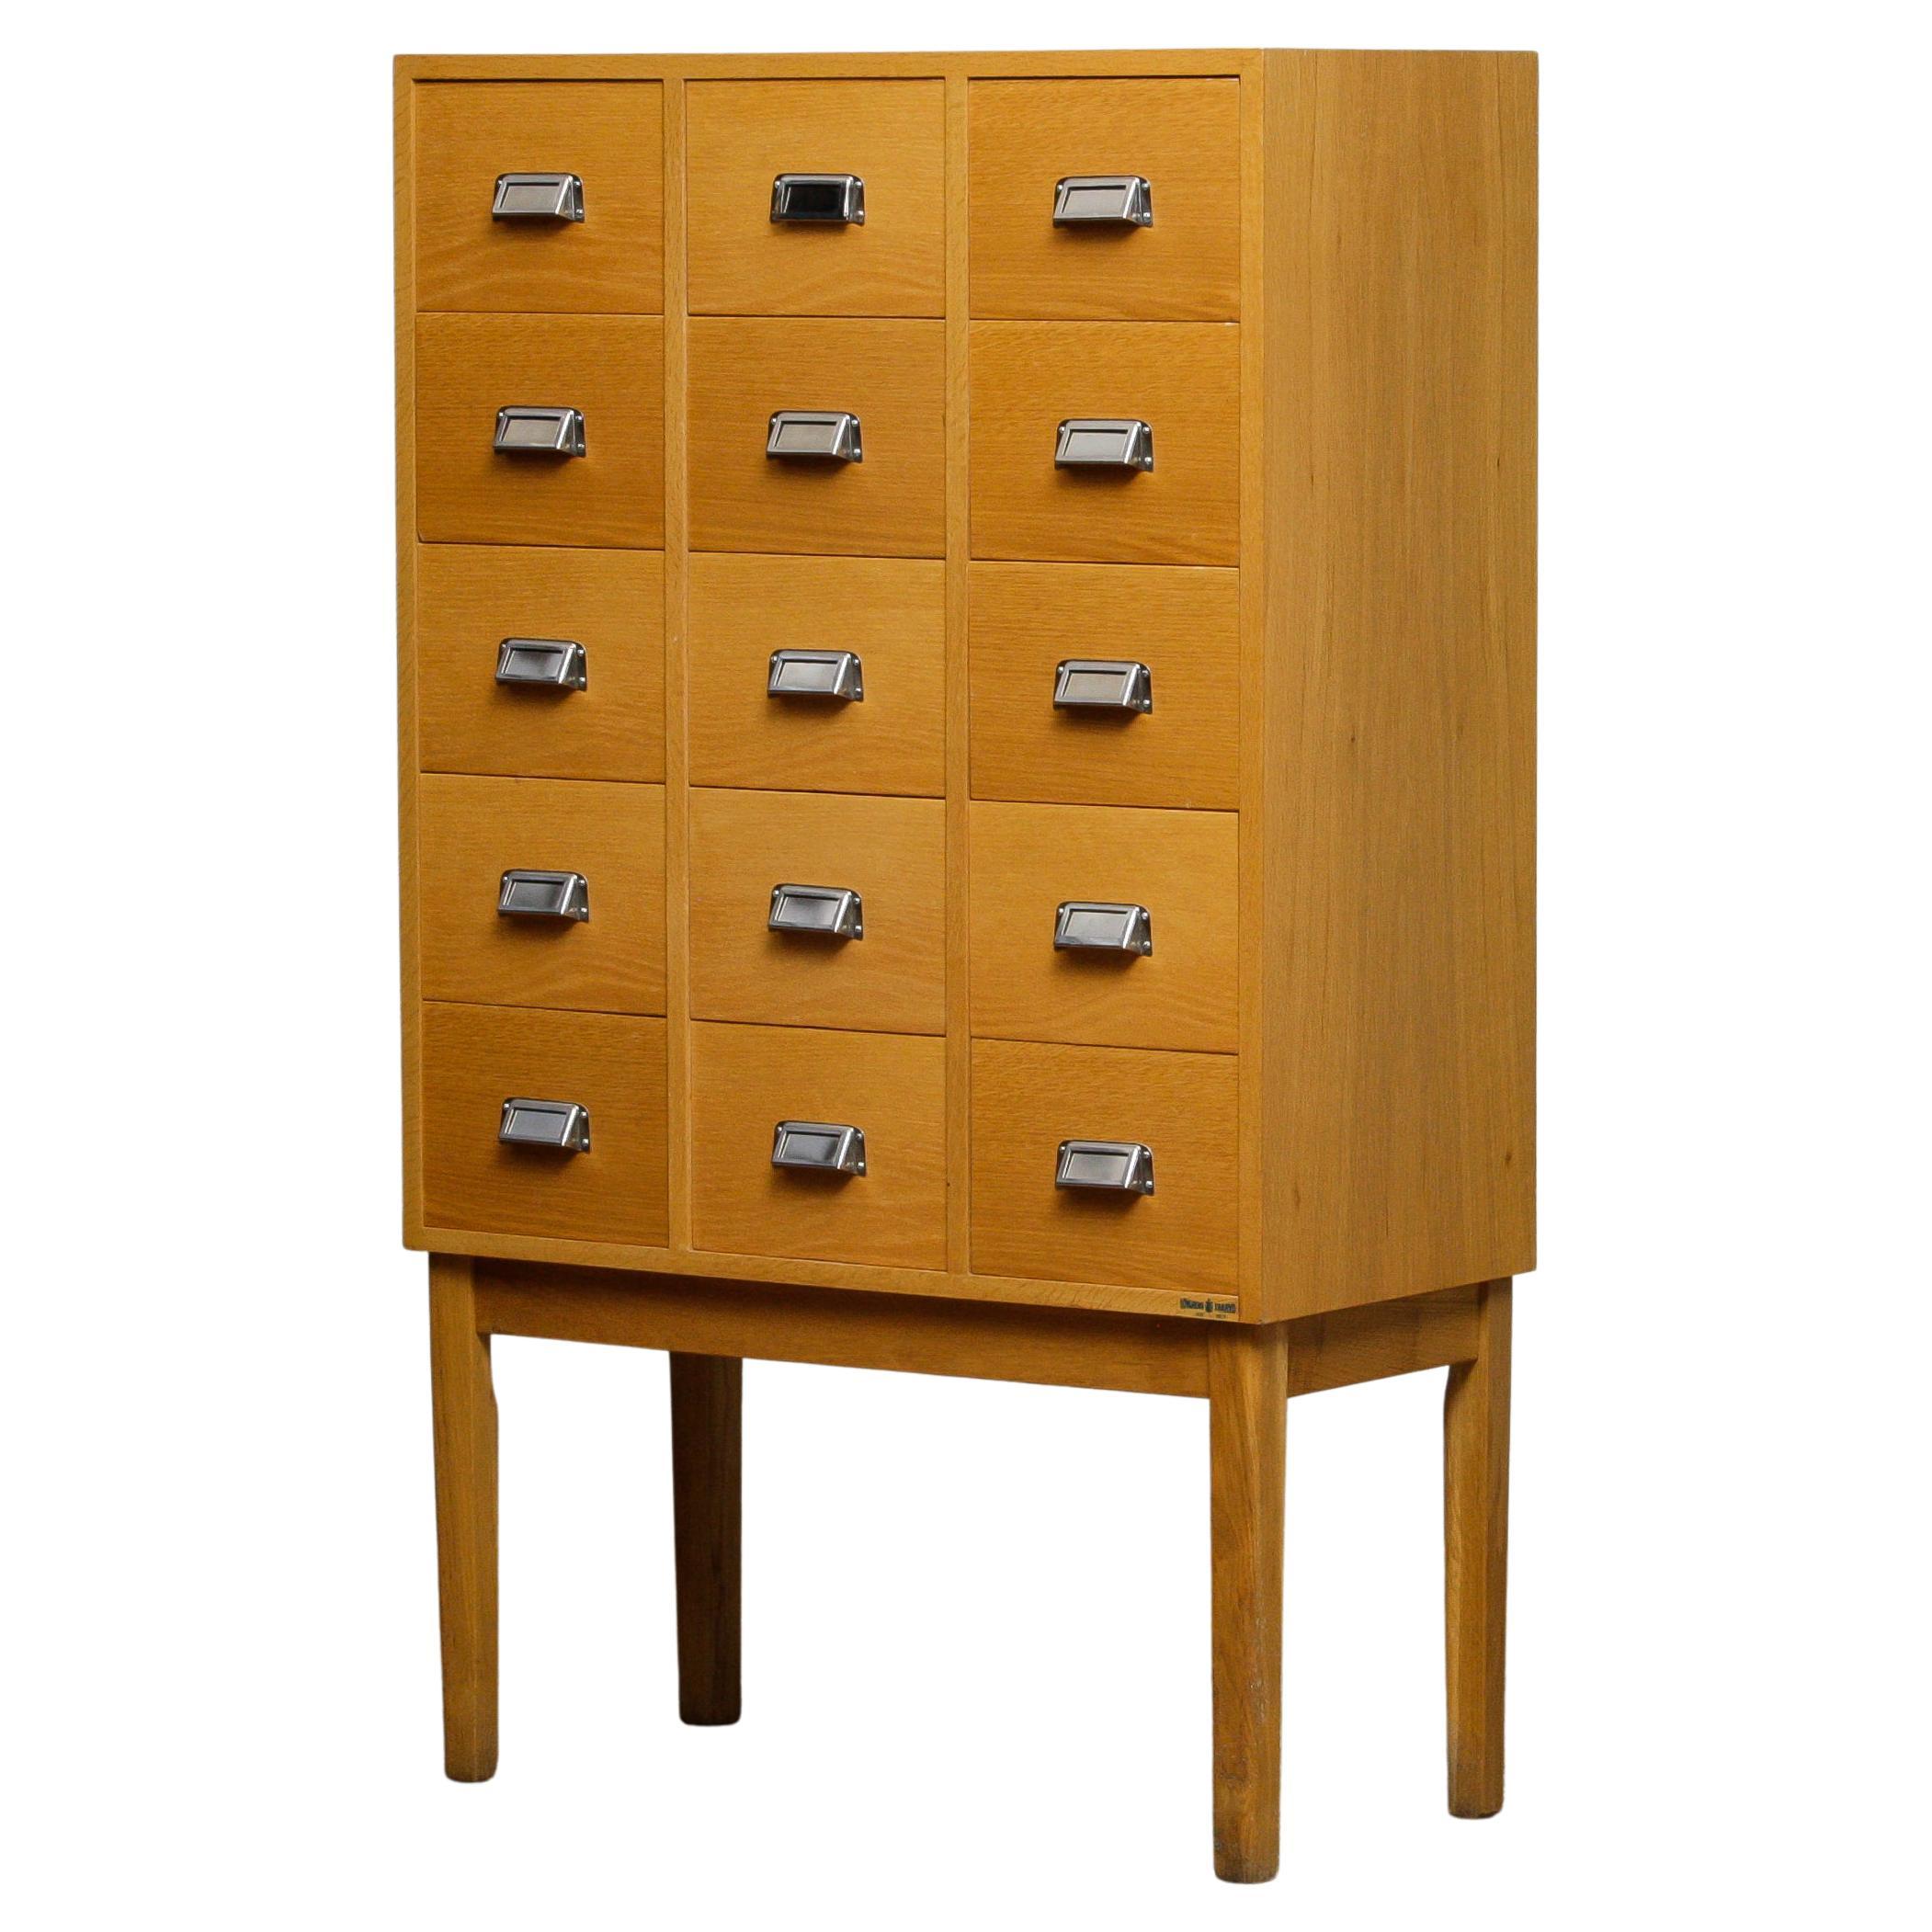 1970s, Oak Drawer Archive Cabinet in Oak and Beech by Lövgrens Traryd, Sweden For Sale